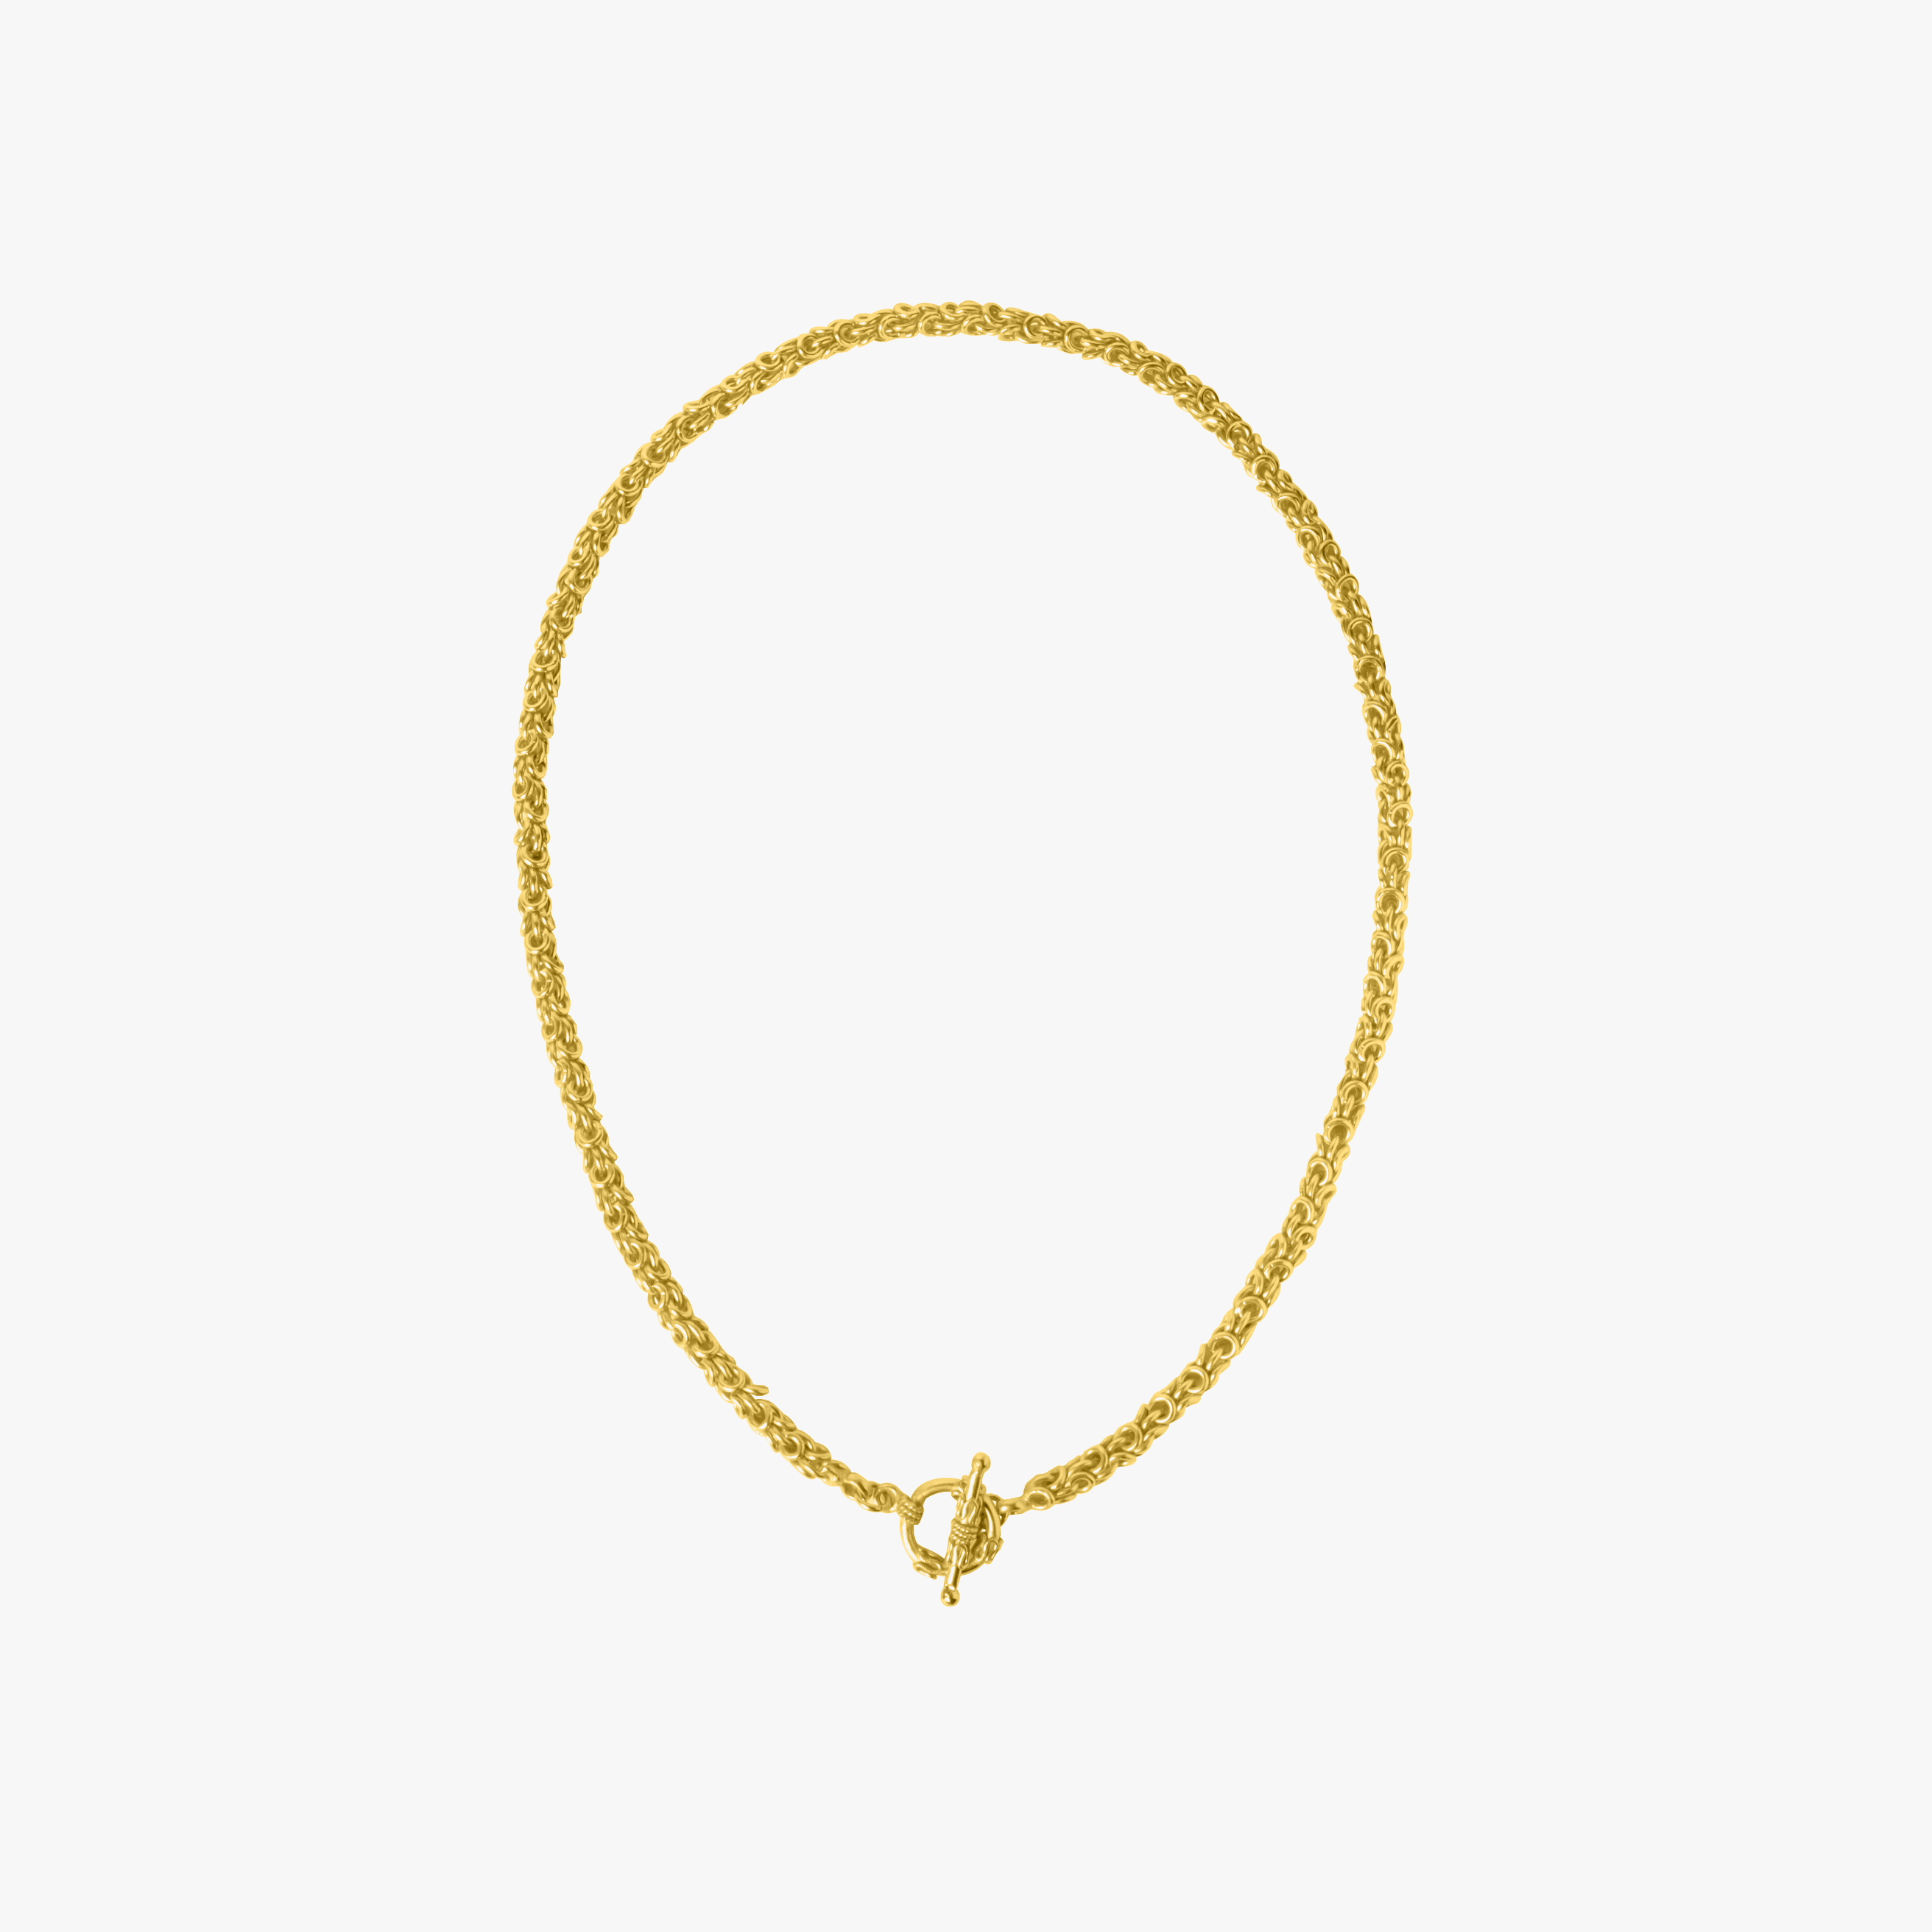 NEXUS LINK NECKLACE GOLD TONE , a product by Equiivalence